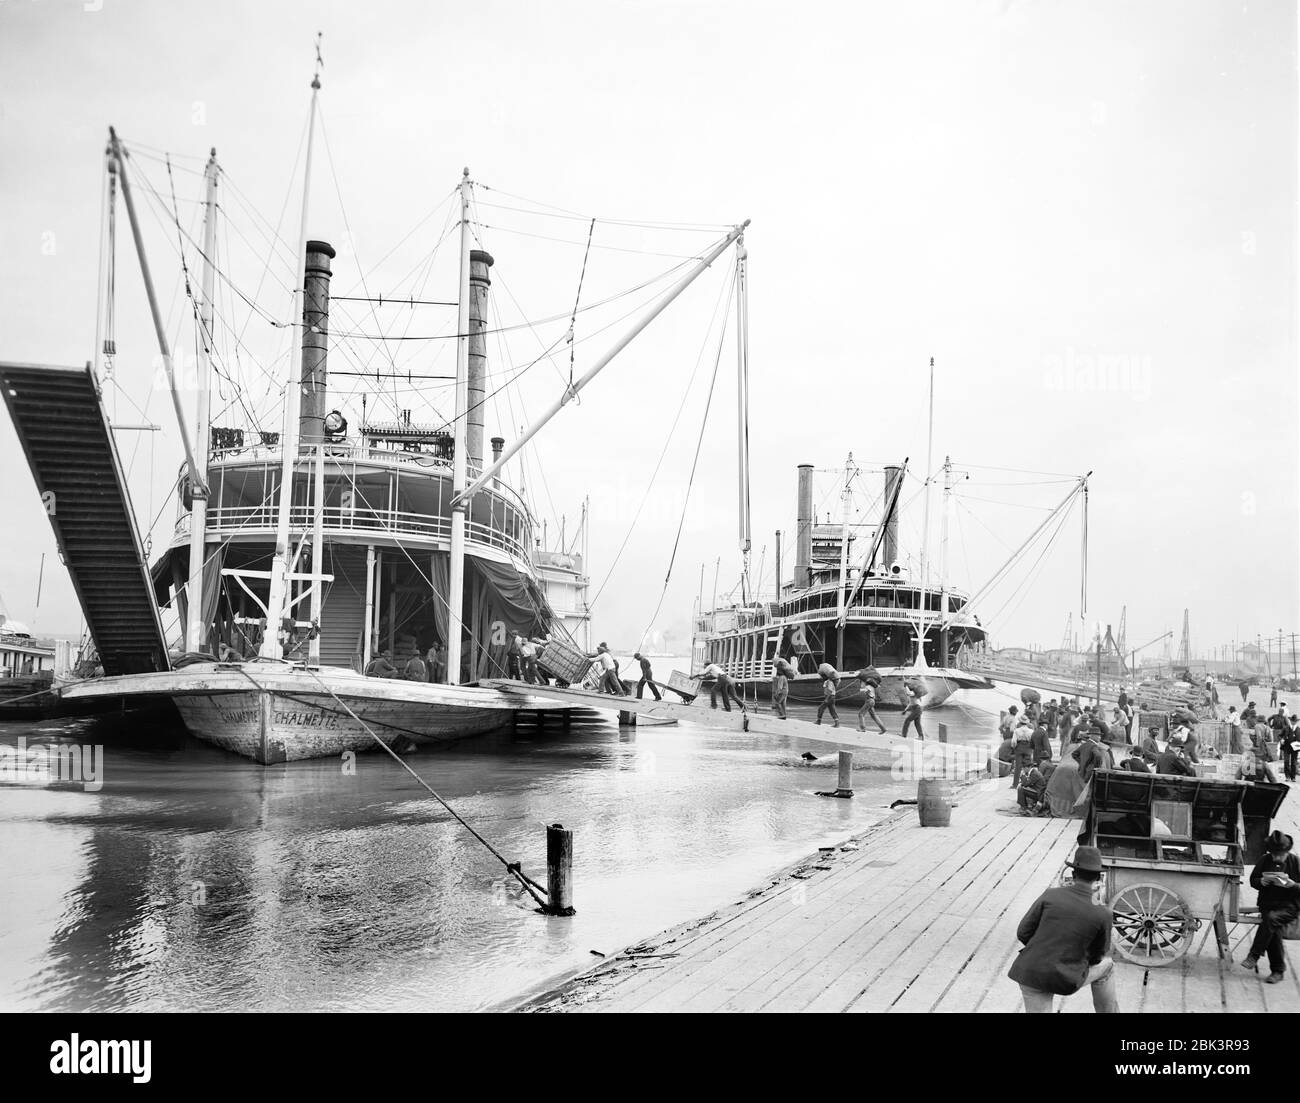 Loading Steamers during High Water, New Orleans, Louisiana, USA, Detroit Publishing Company, March 1903 Stock Photo